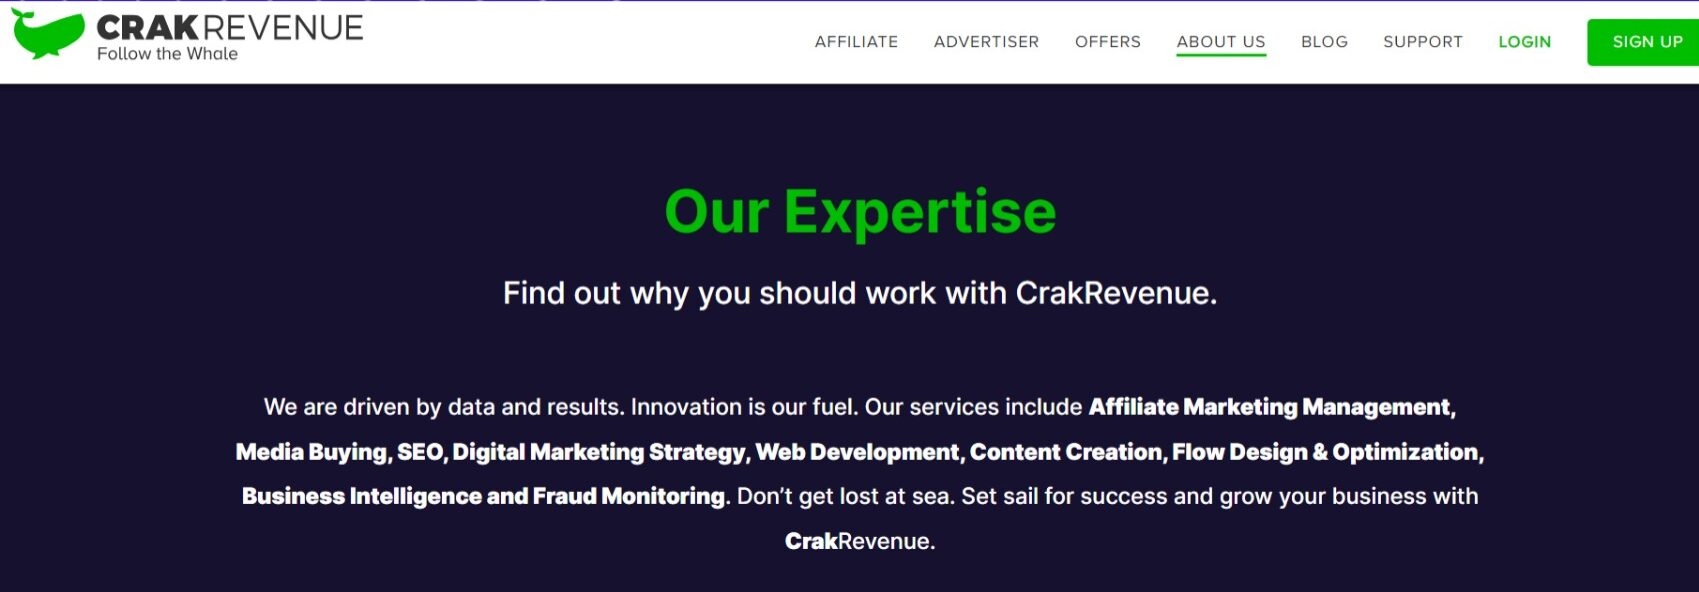 why you should work with CrakRevenue.